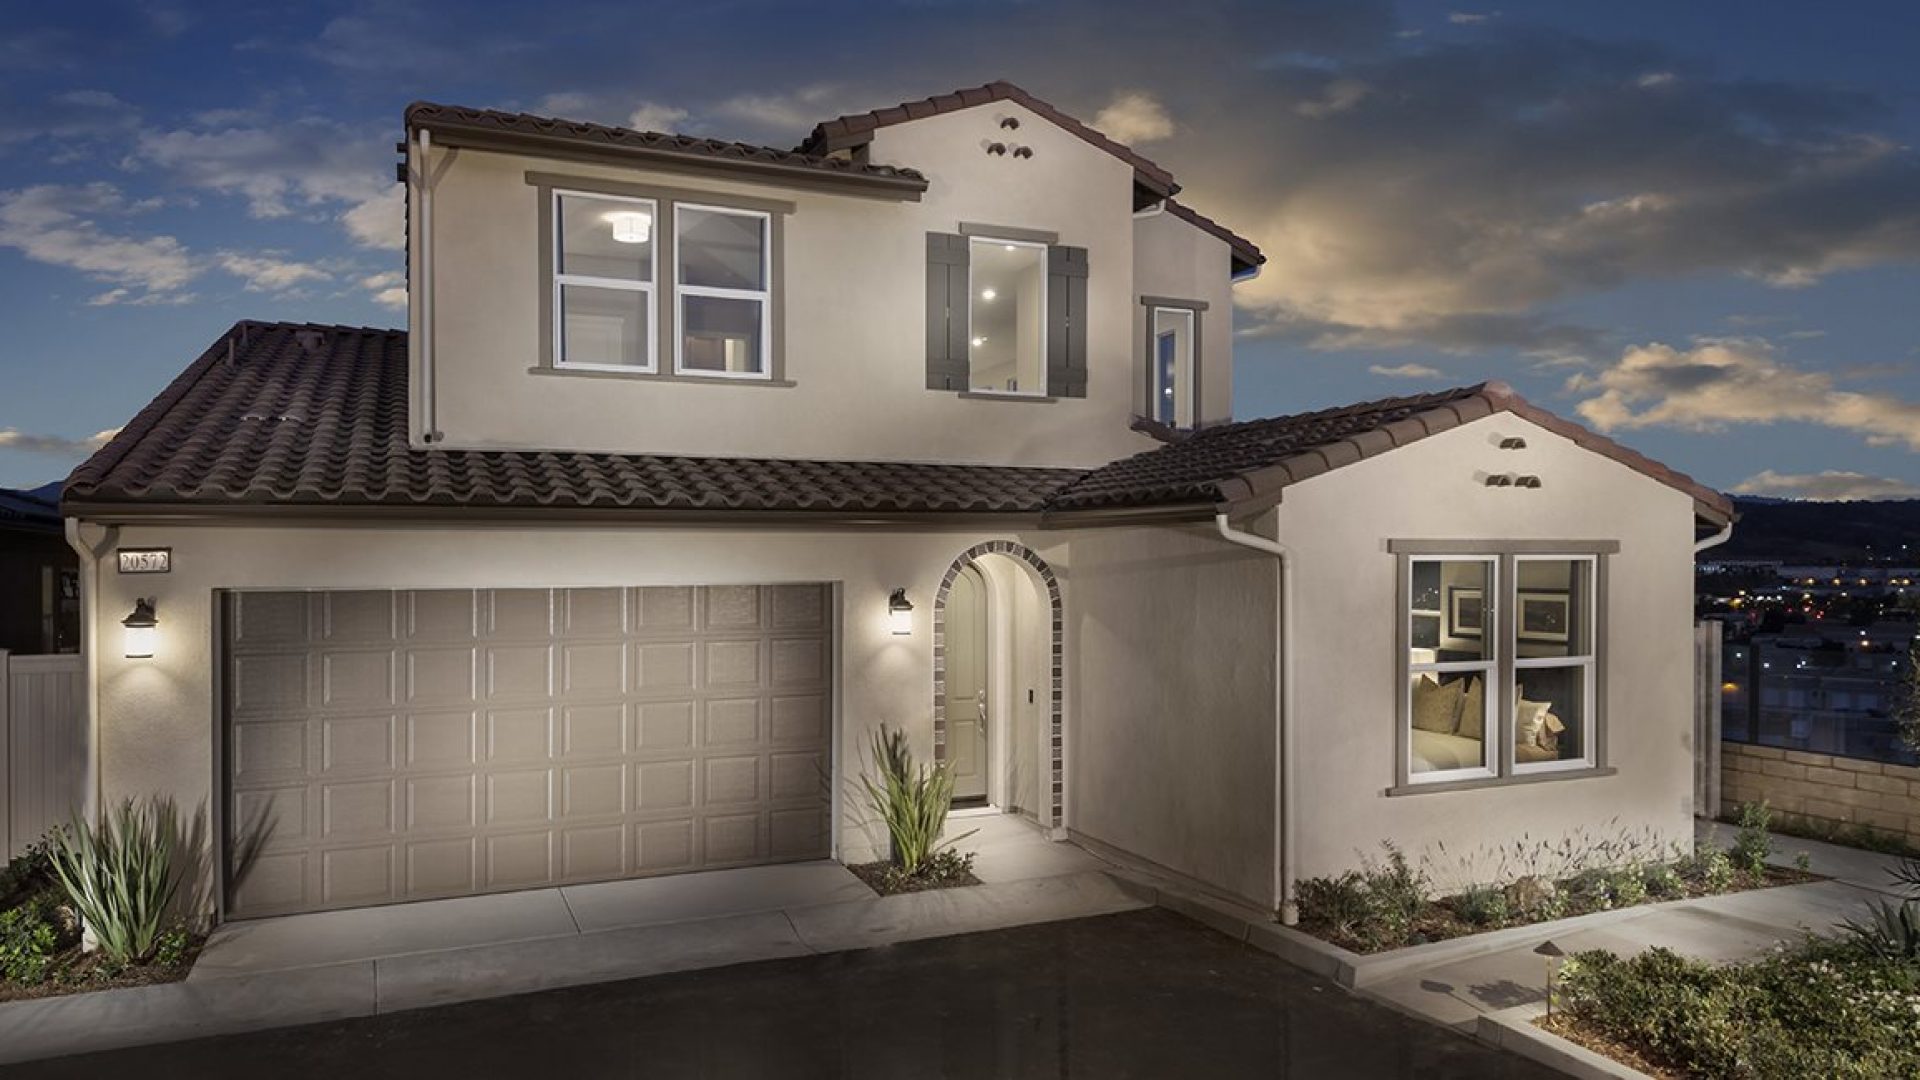 Galloway new homes by Lennar in Los Angeles California